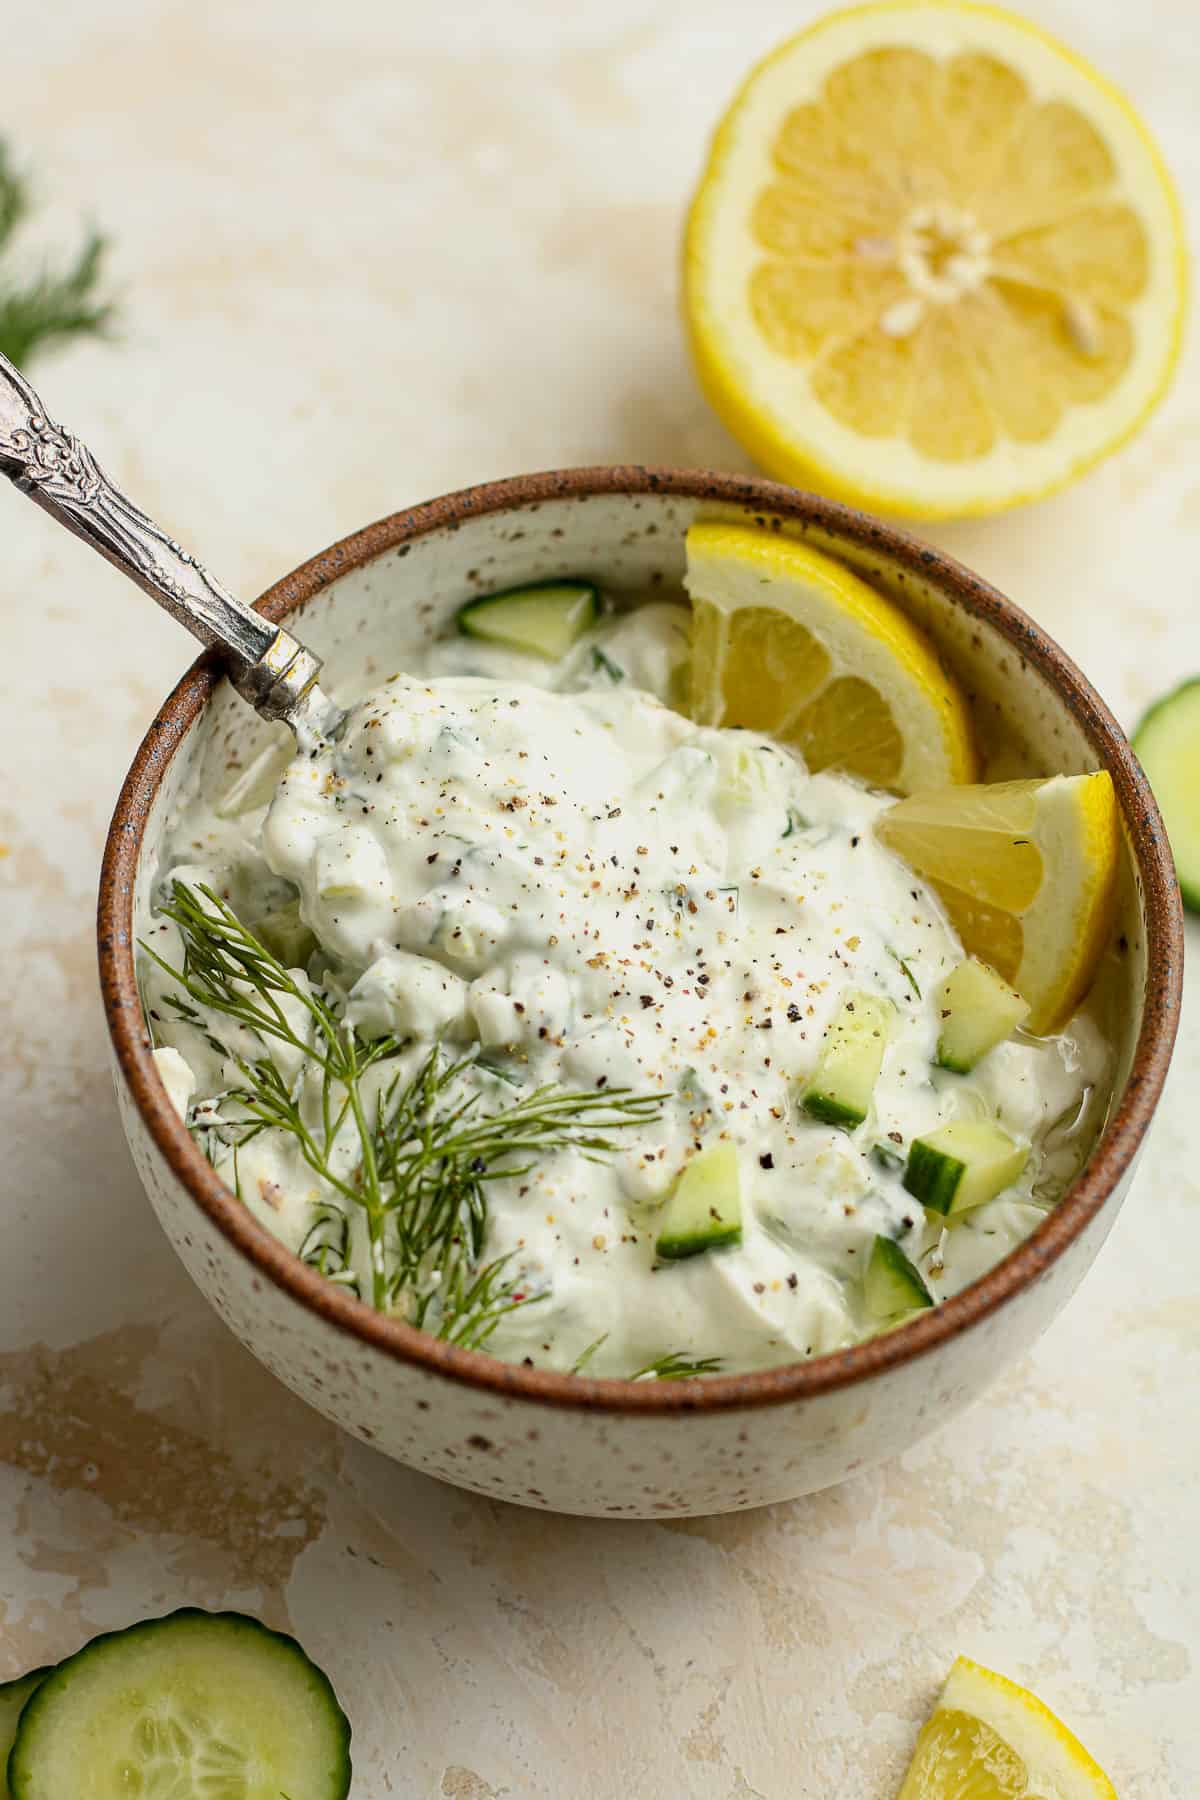 Side view of some homemade tzatziki sauce with a tablespoon.